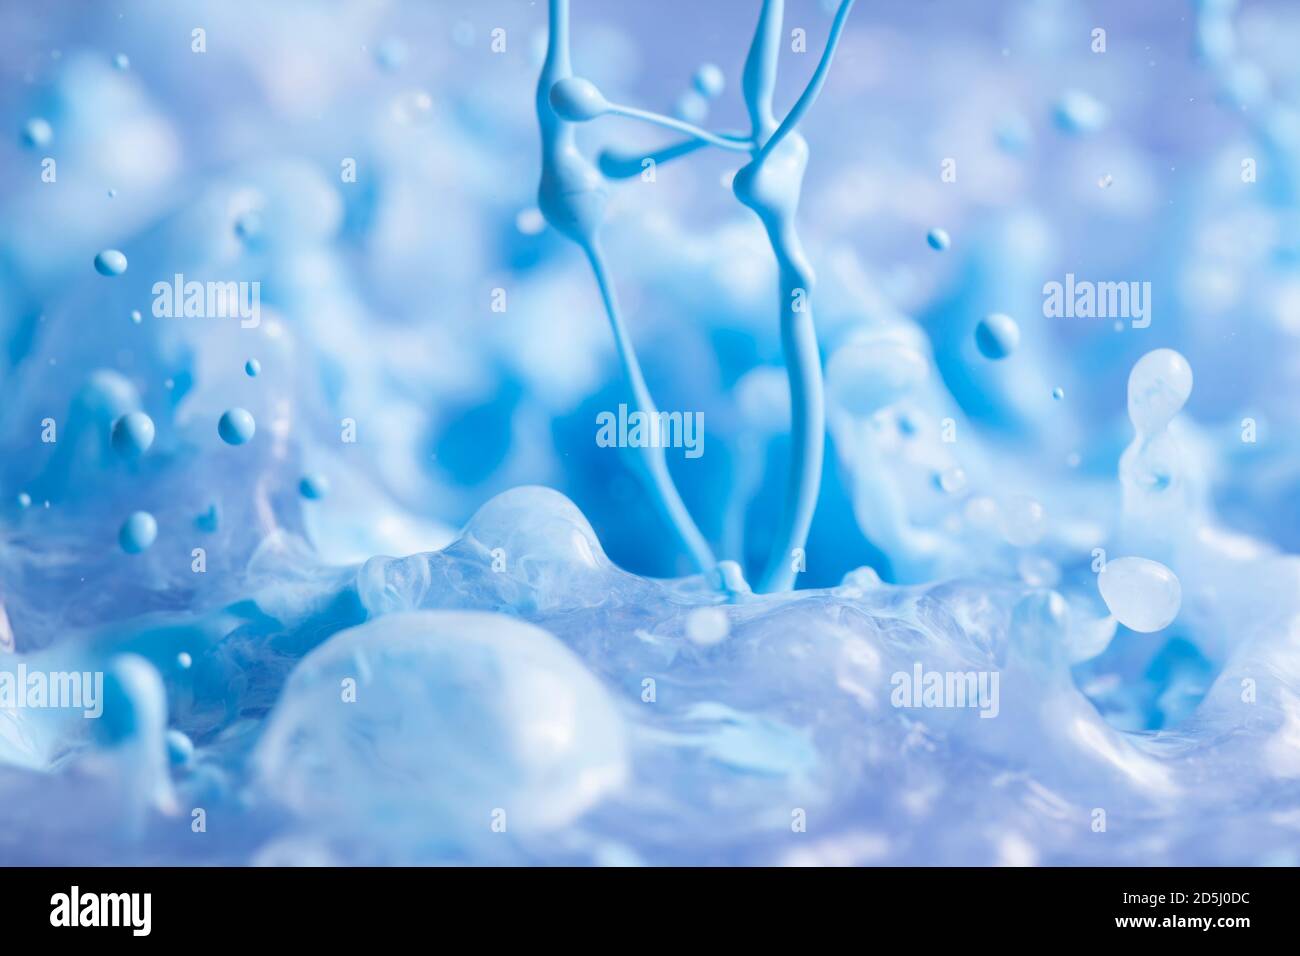 Blue paint splashing creating lots of paint bubbles and droplets. Stock Photo